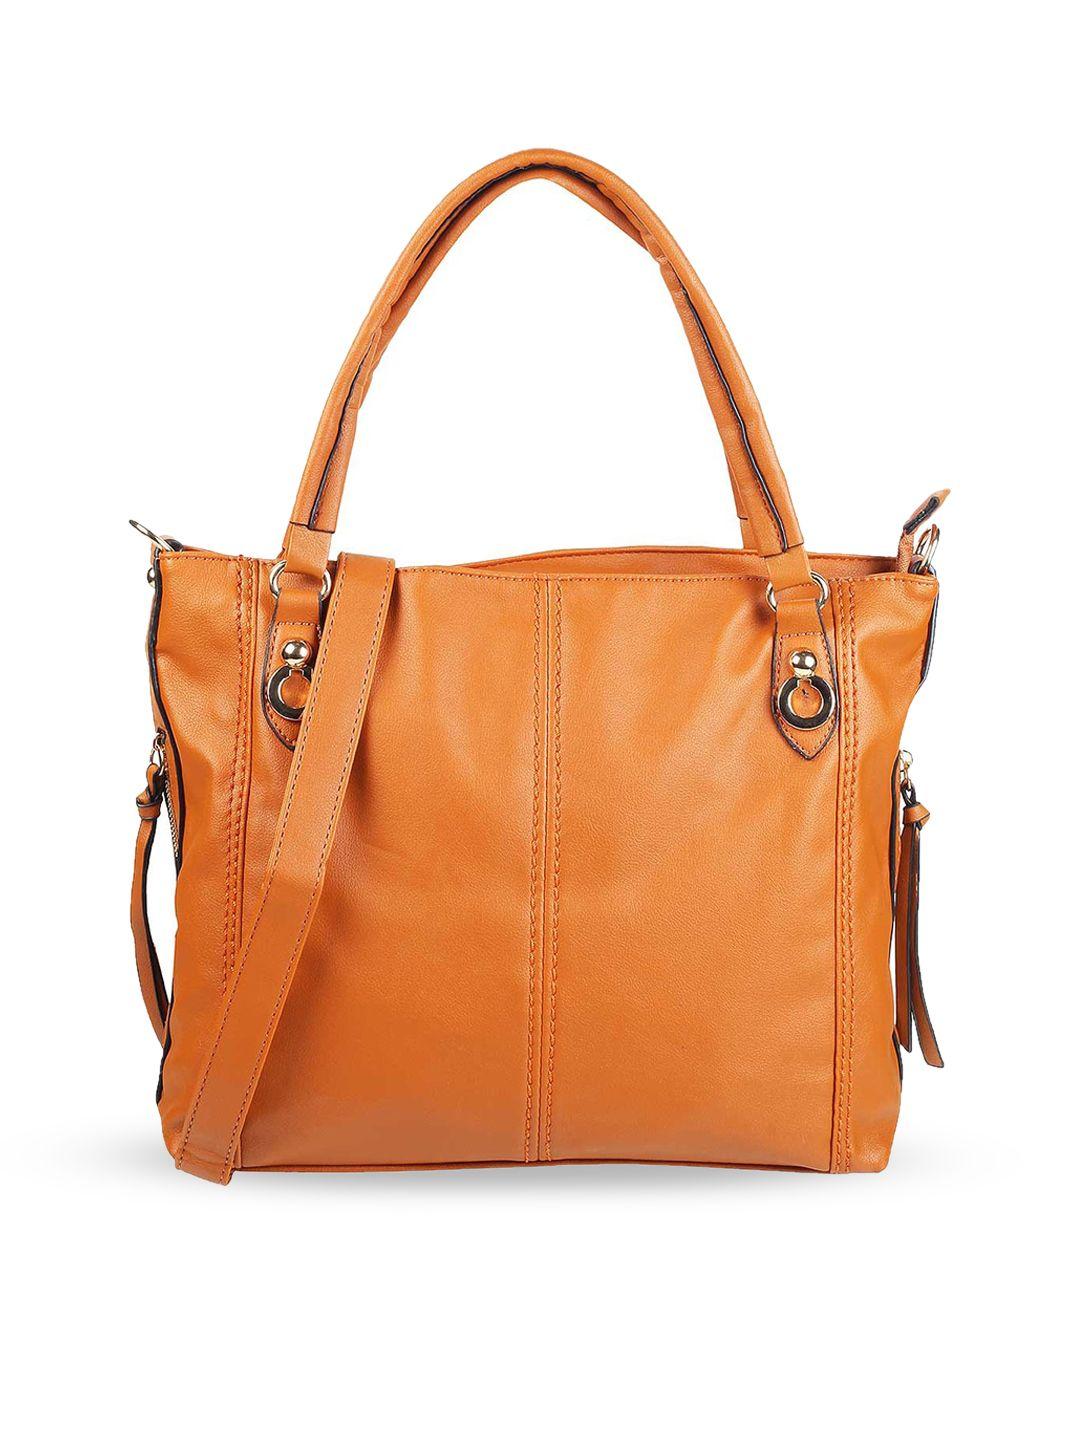 walkway by metro structured shoulder bag with tasselled